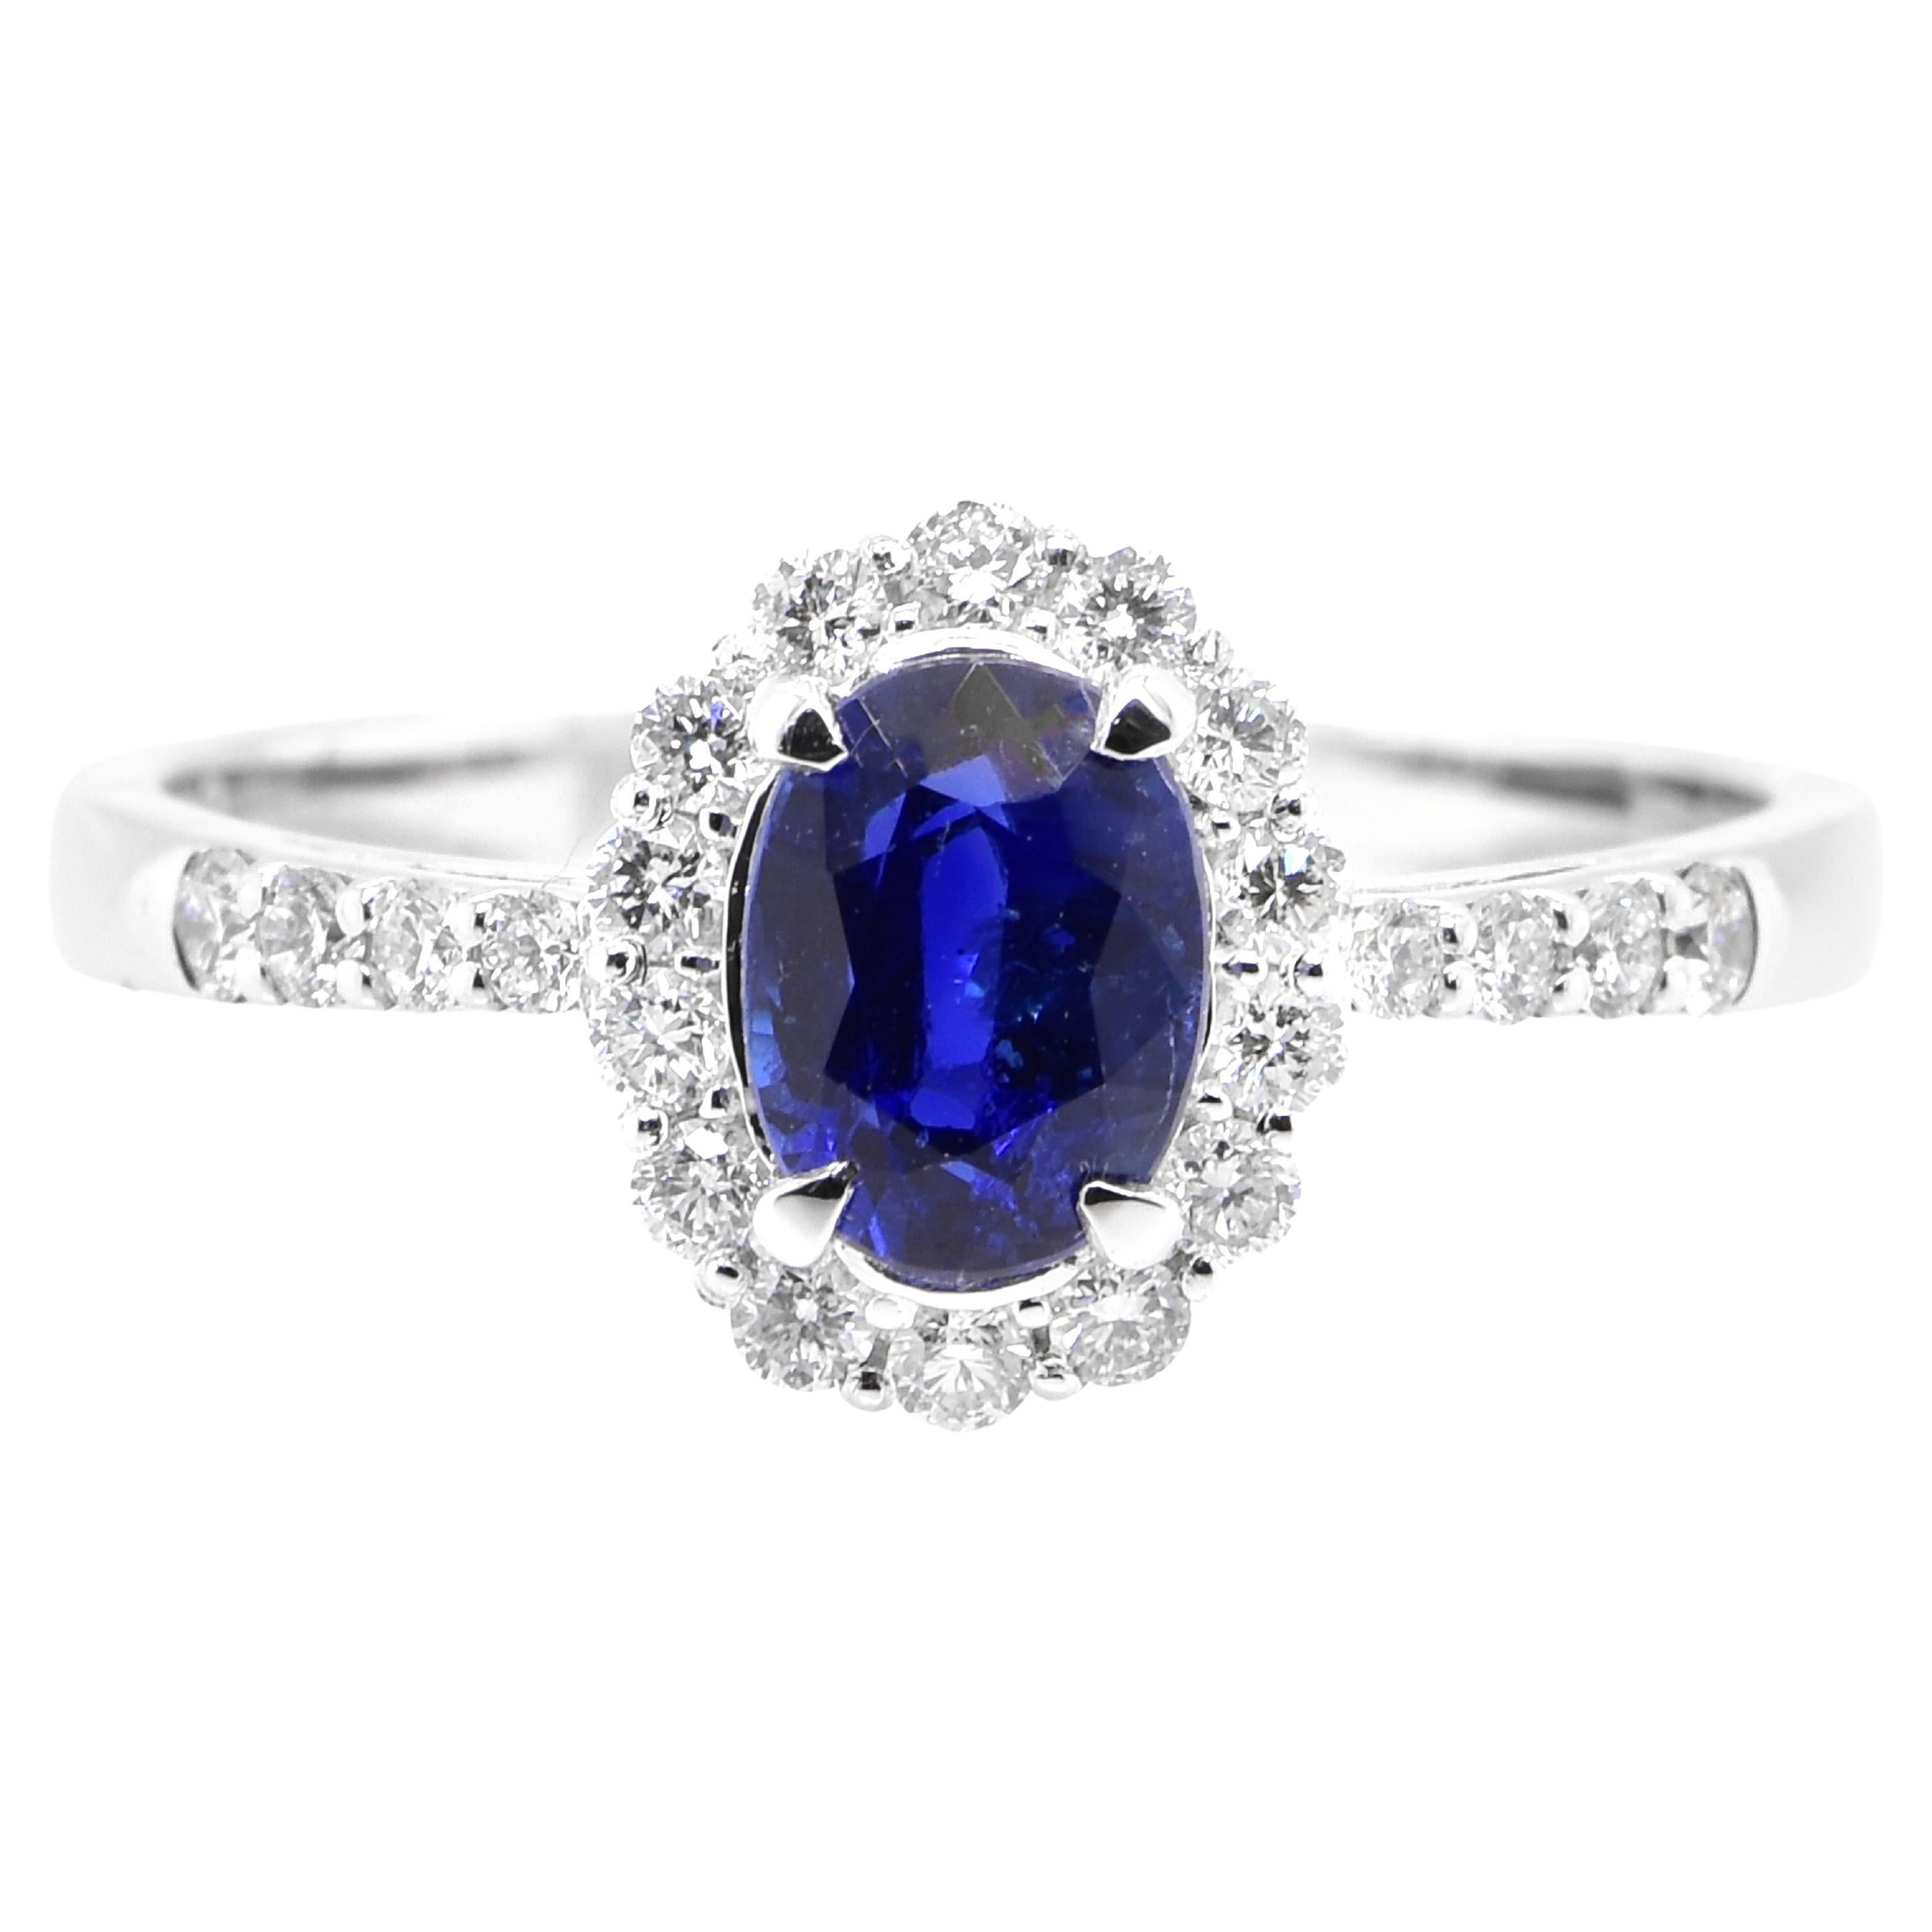 1.07 Carat, Unheated, Royal Blue Color Sapphire and Diamond Ring Set in Platinum For Sale